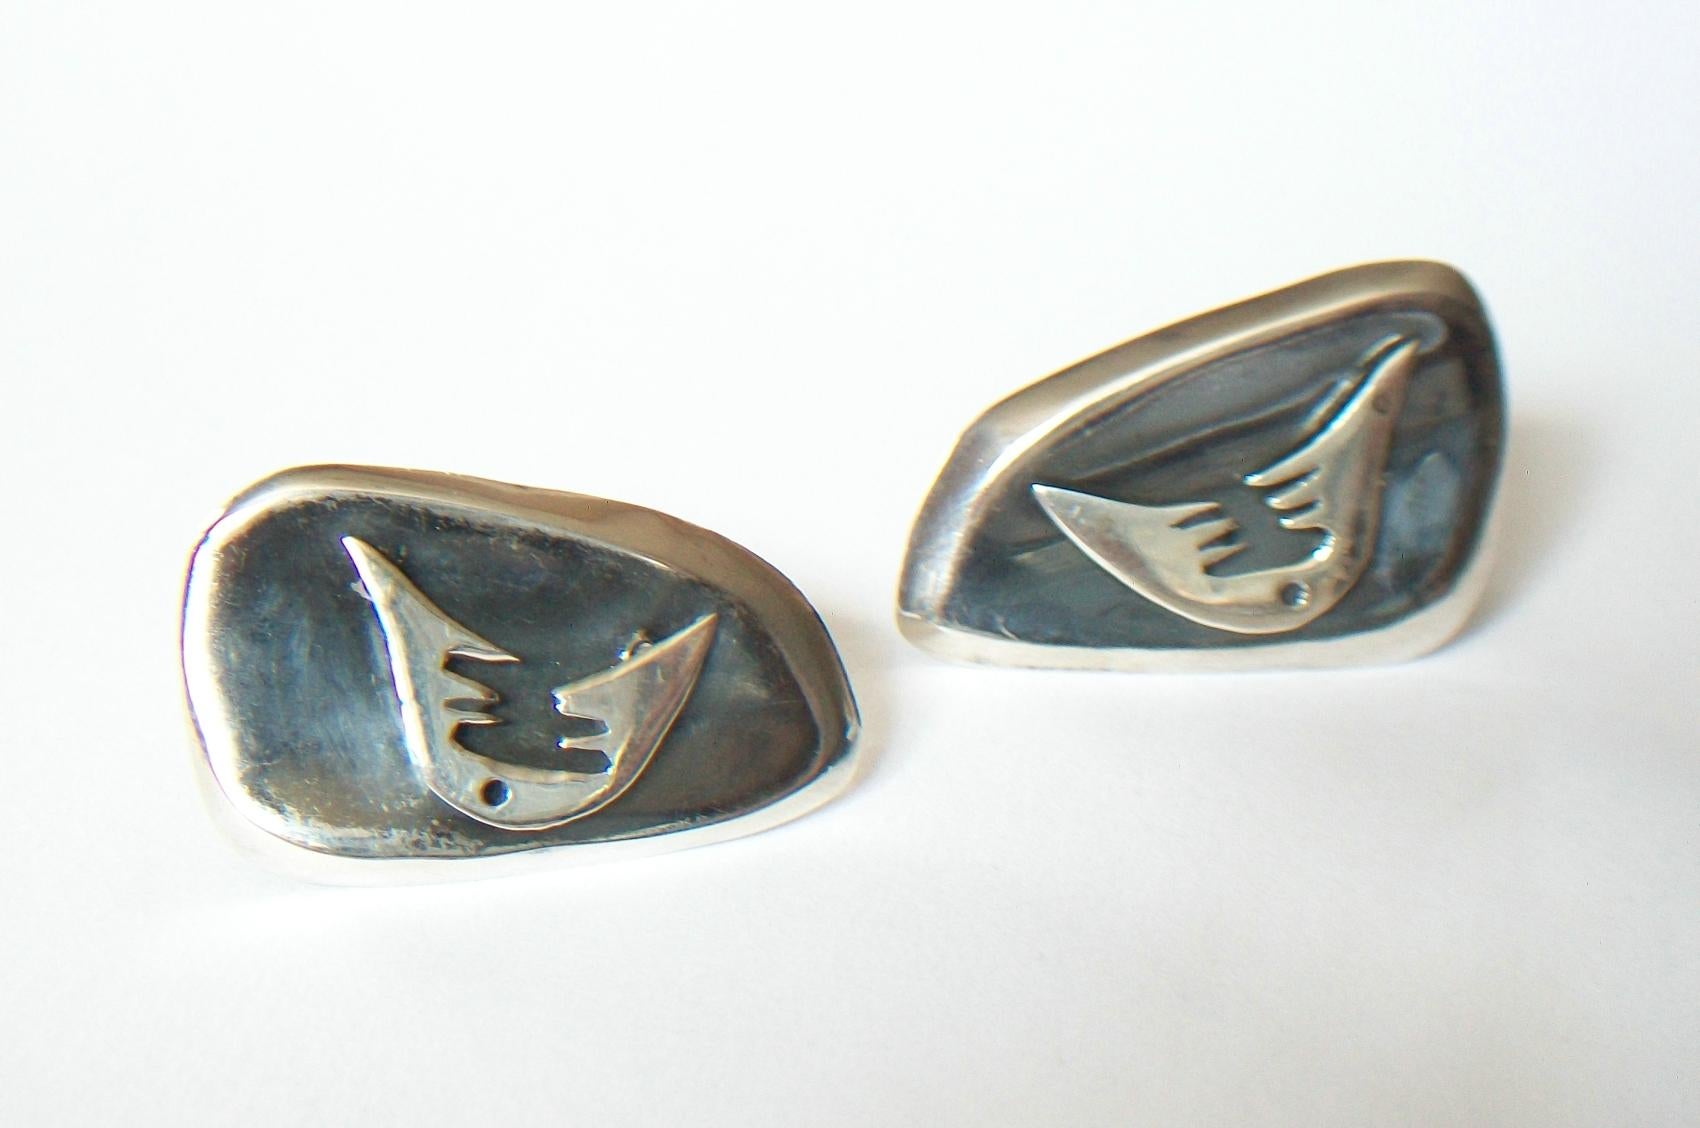 ALFREDO VILLASANA (Designer/Maker) - Modernist sterling silver earrings - hand made - sculptural details - screw backs - one earring signed on the back - 925/1000 - Mexico (Taxco) - circa 1950's.

Excellent vintage condition - all original -